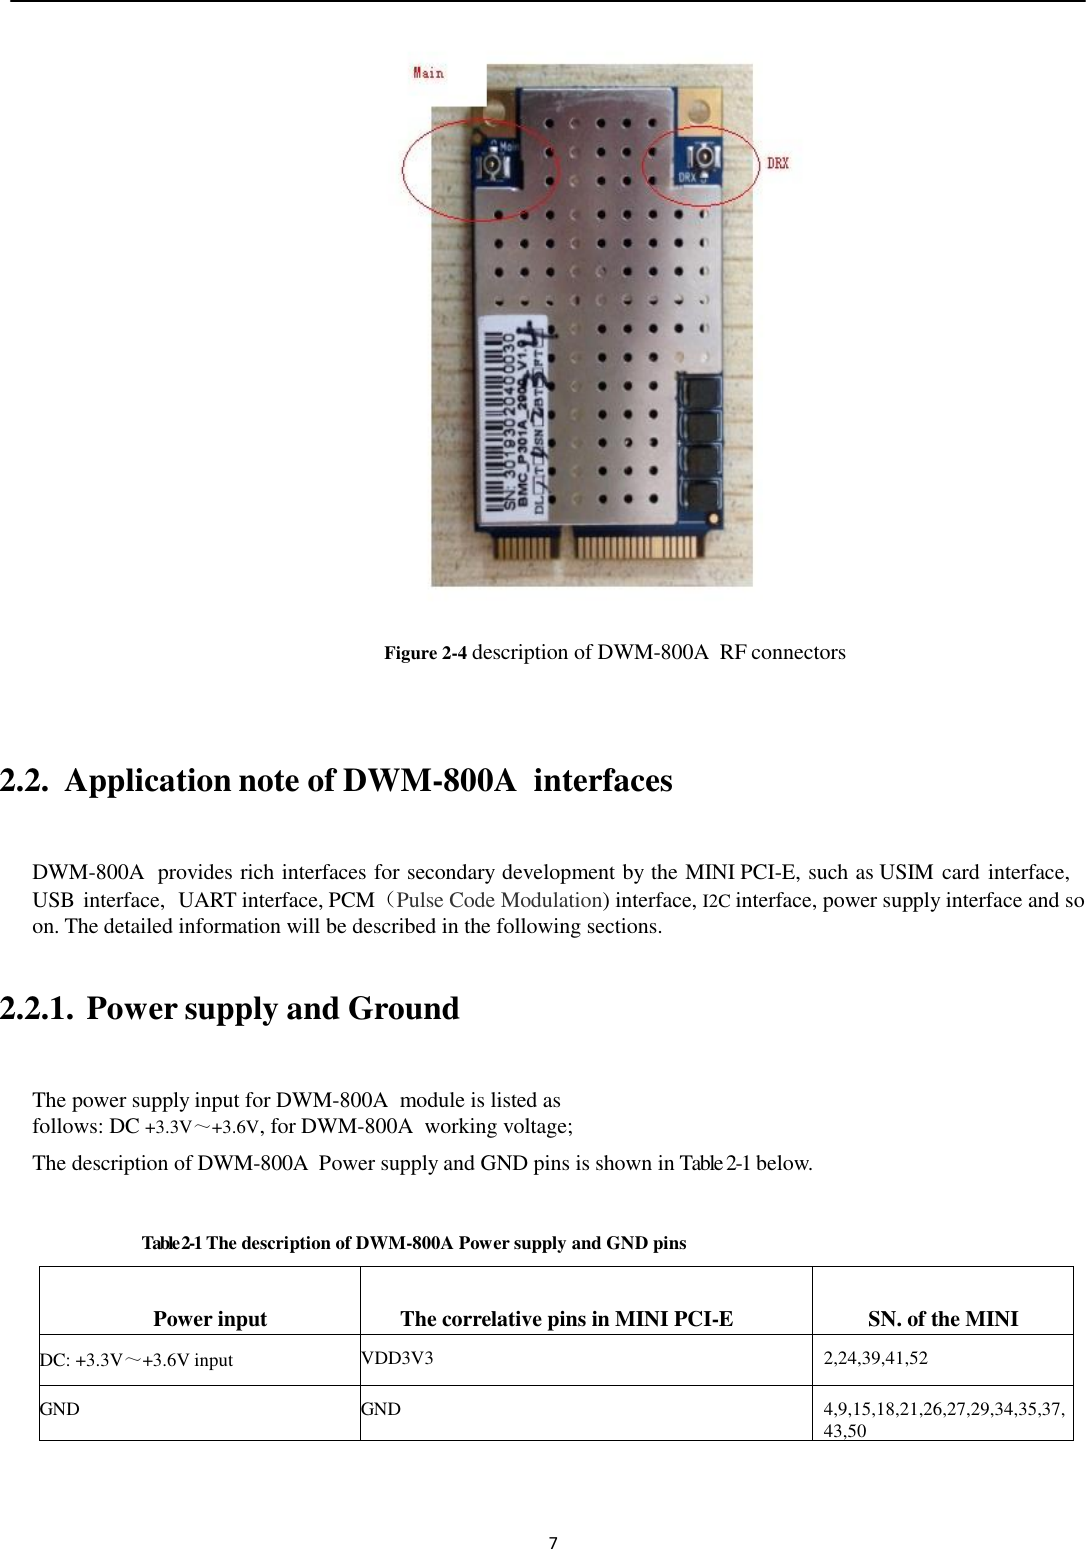   7                       Figure 2-4 description of DWM-800A  RF connectors   2.2.  Application note of DWM-800A  interfaces  DWM-800A  provides rich interfaces for secondary development by the MINI PCI-E, such as USIM card interface, USB interface,  UART interface, PCM（Pulse Code Modulation) interface, I2C interface, power supply interface and so on. The detailed information will be described in the following sections.  2.2.1.  Power supply and Ground  The power supply input for DWM-800A  module is listed as follows: DC +3.3V～+3.6V, for DWM-800A  working voltage; The description of DWM-800A  Power supply and GND pins is shown in Table 2-1 below.  Table 2-1 The description of DWM-800A Power supply and GND pins  Power input  The correlative pins in MINI PCI-E  SN. of the MINI PCI-E DC: +3.3V～+3.6V input VDD3V3 2,24,39,41,52 GND GND 4,9,15,18,21,26,27,29,34,35,37,43,50   